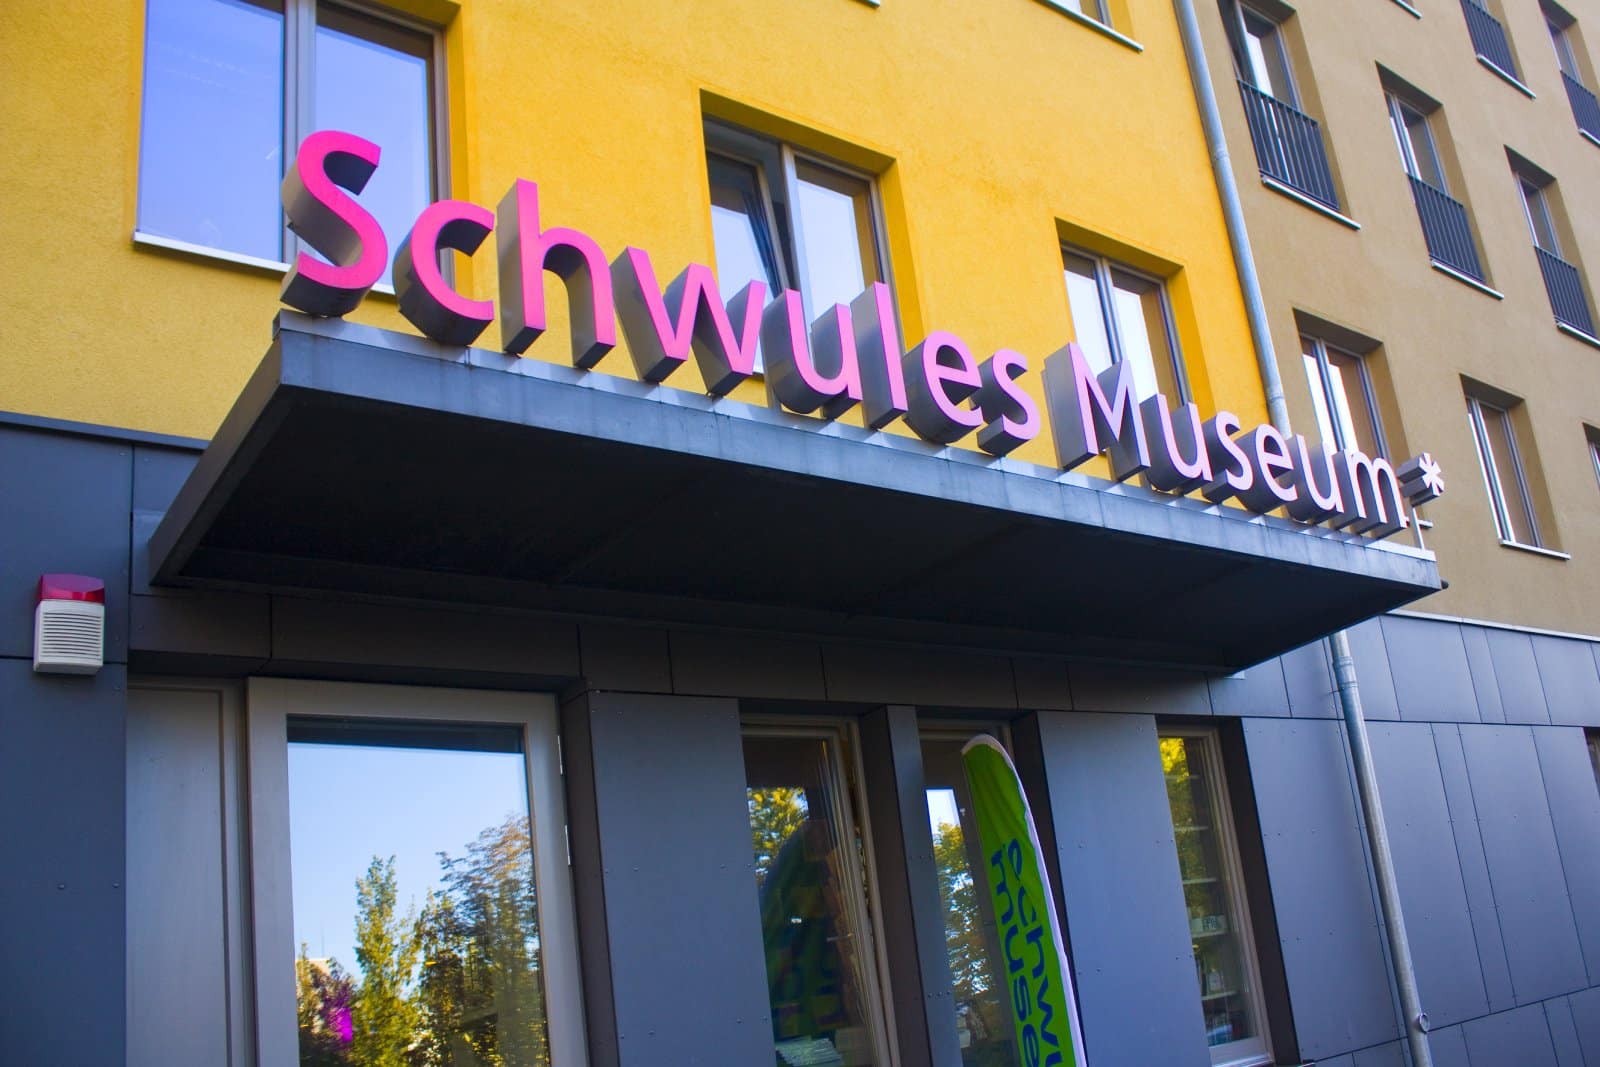 Image Credit: Shutterstock / lindasky76 <p><span> One of the world’s first museums dedicated to LGBTQ+ history, art, and culture, the Schwules Museum in Berlin offers a comprehensive look at the LGBTQ+ community’s struggles and achievements. The museum features exhibitions on various aspects of LGBTQ+ life and history, including the vibrant Weimar Republic era and the persecution of LGBTQ+ individuals during the Nazi regime.</span></p>